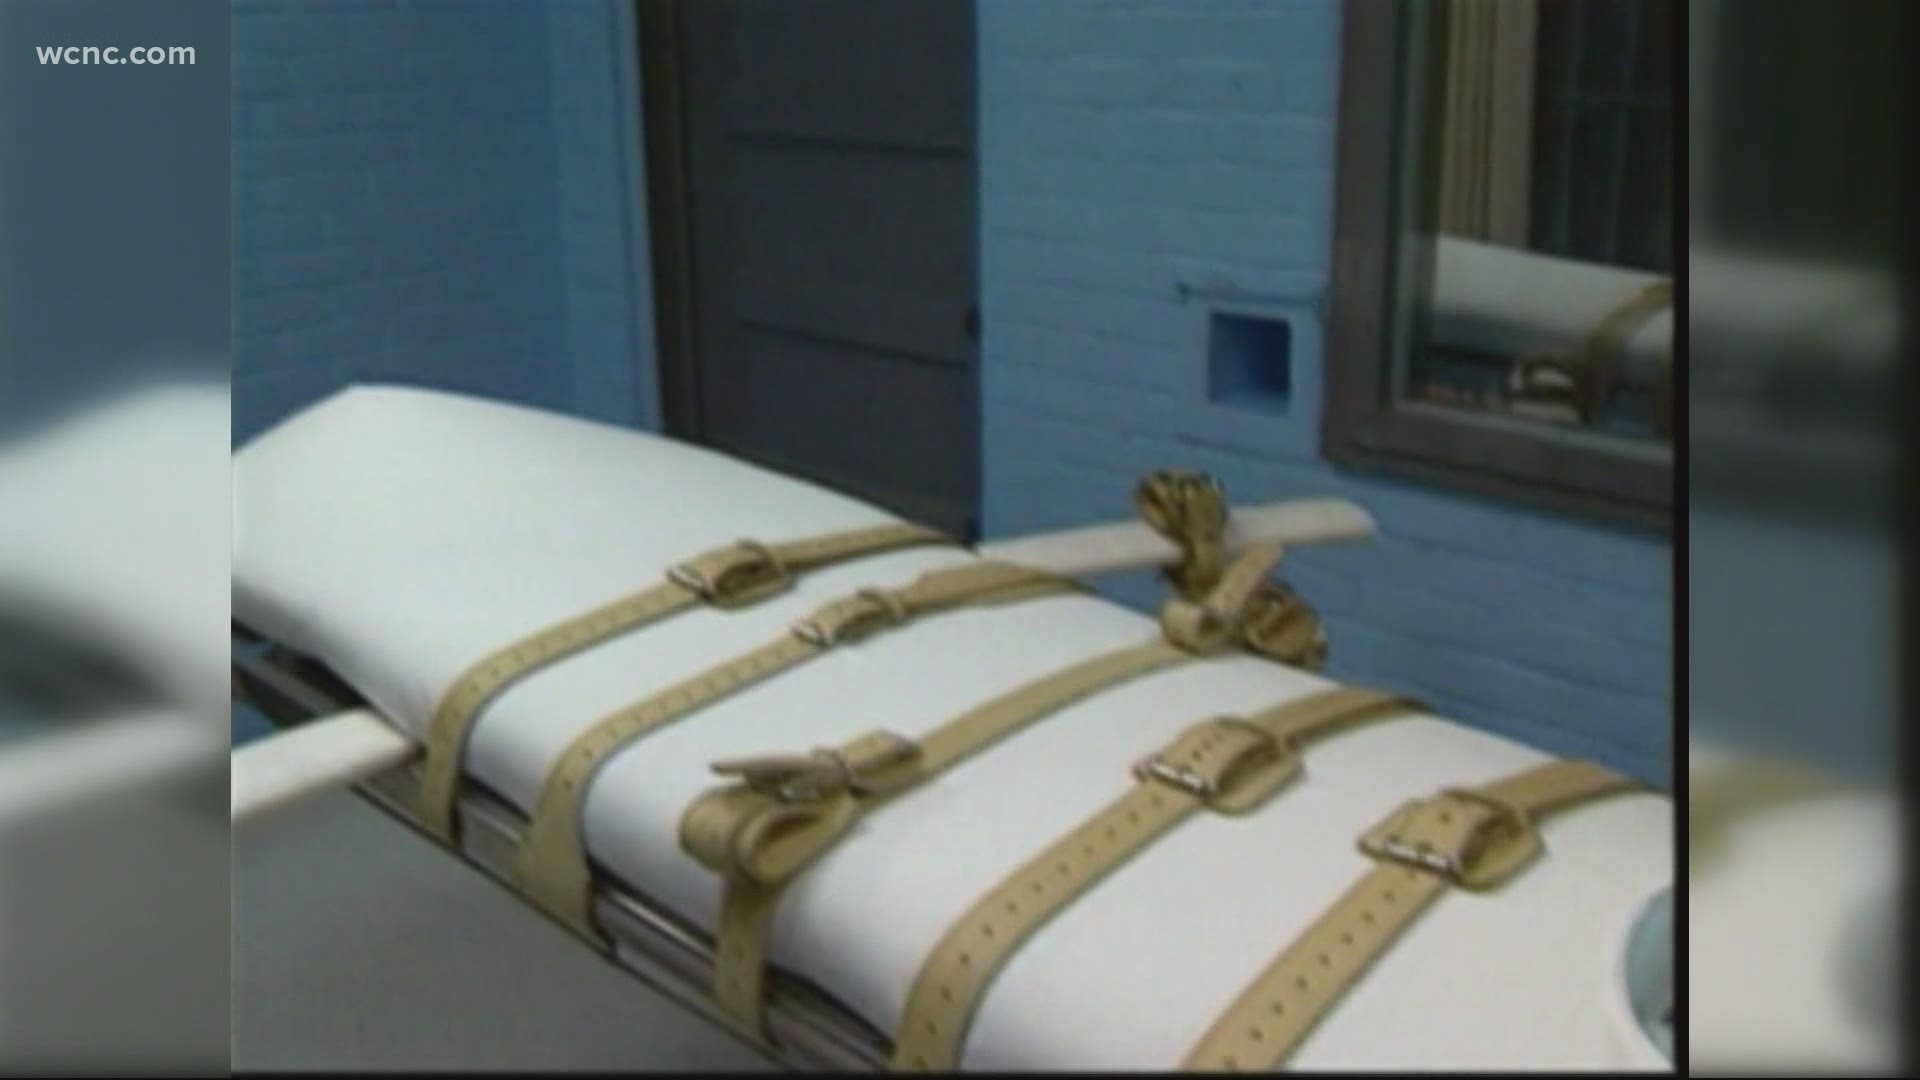 South Carolina Gov. Henry McMaster has signed into law a bill that forces death row inmates to choose between the electric chair or a newly formed firing squad.